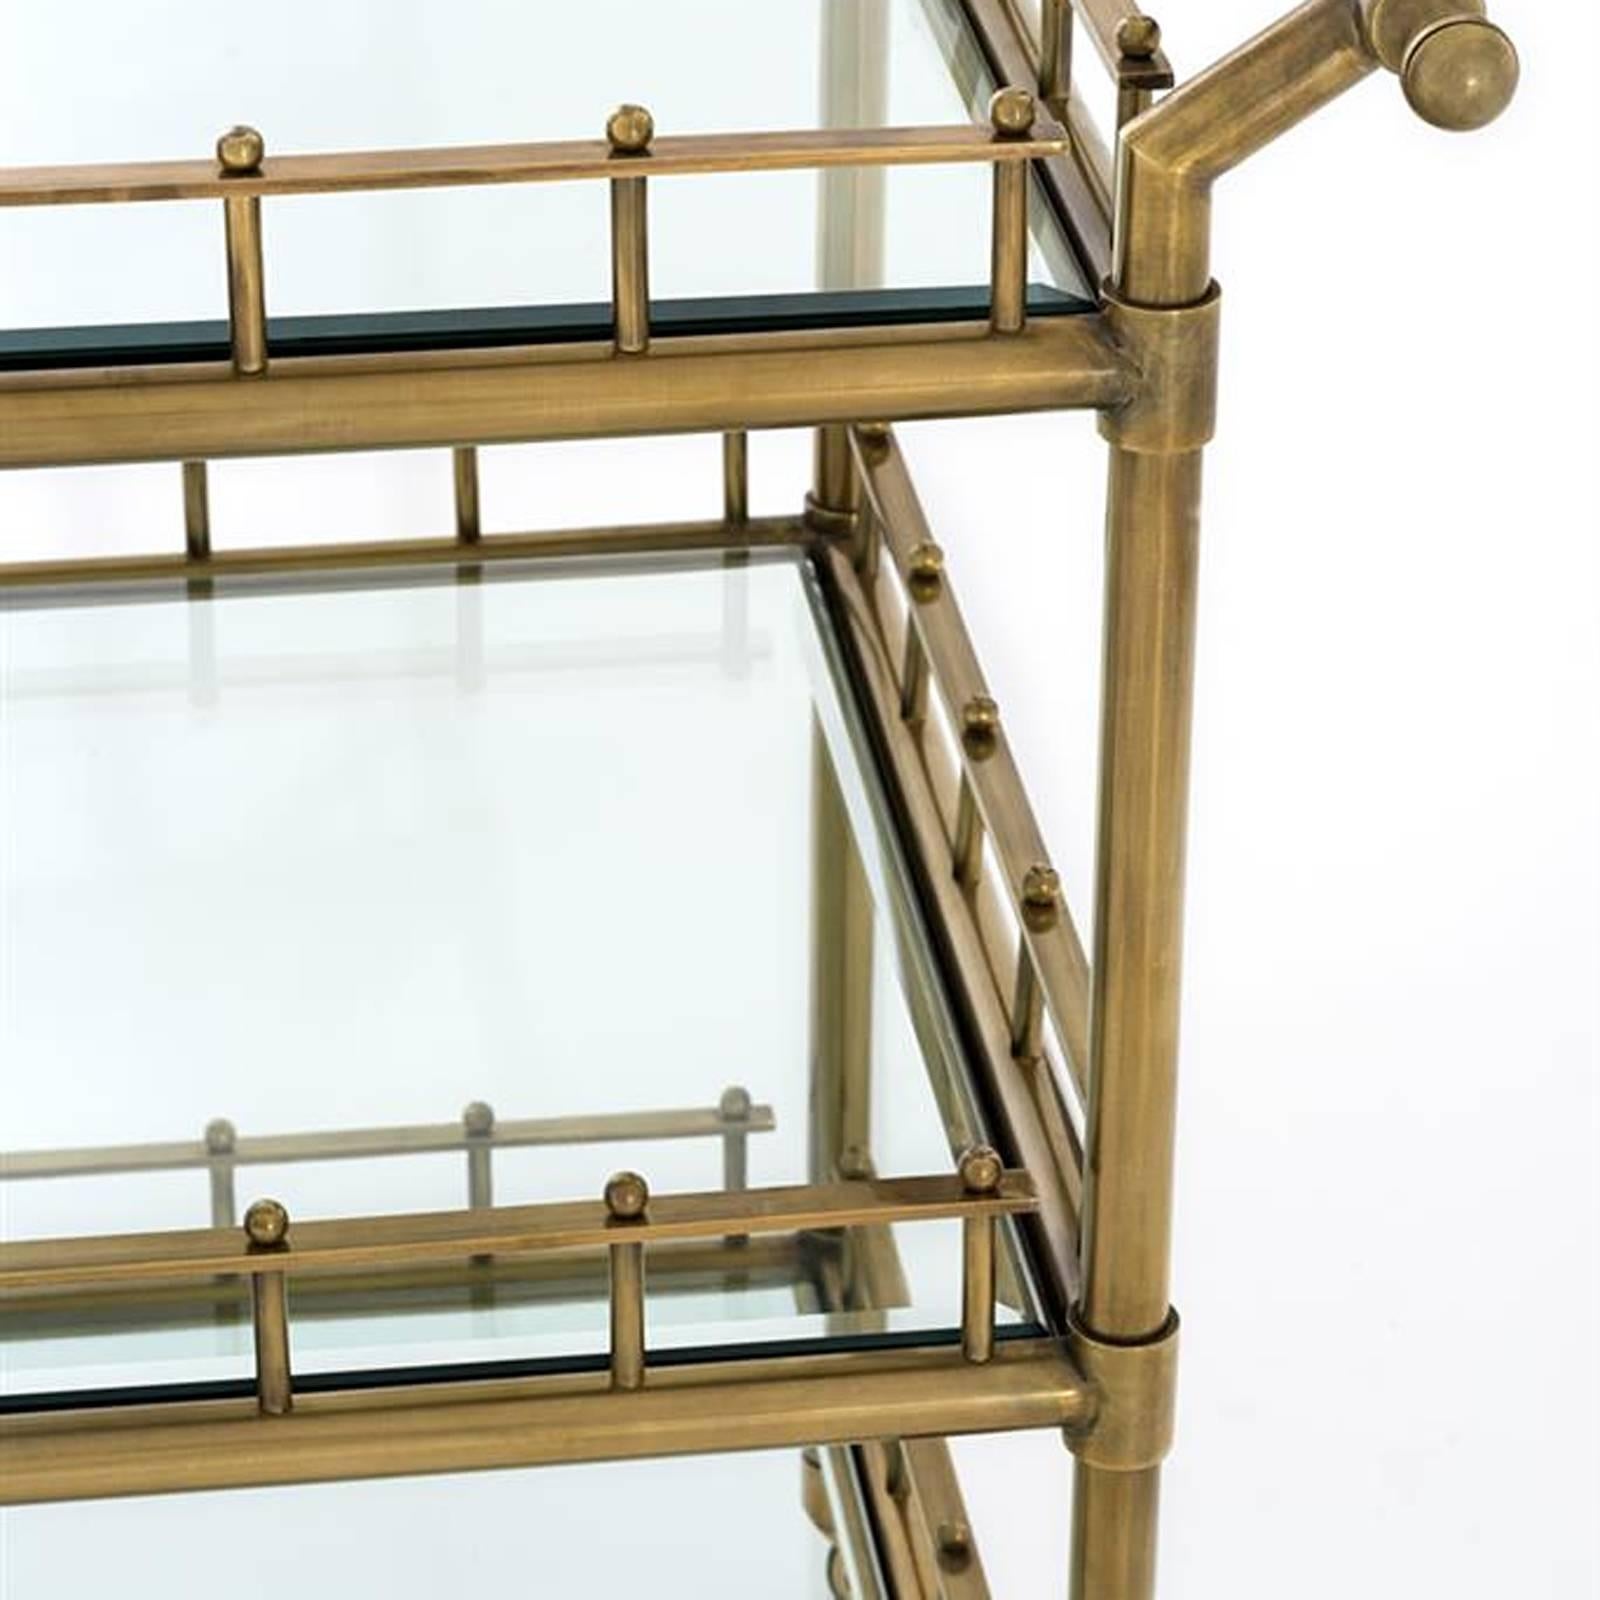 Beveled Queen Trolley in Vintage Brass or Polished Stainless Steel